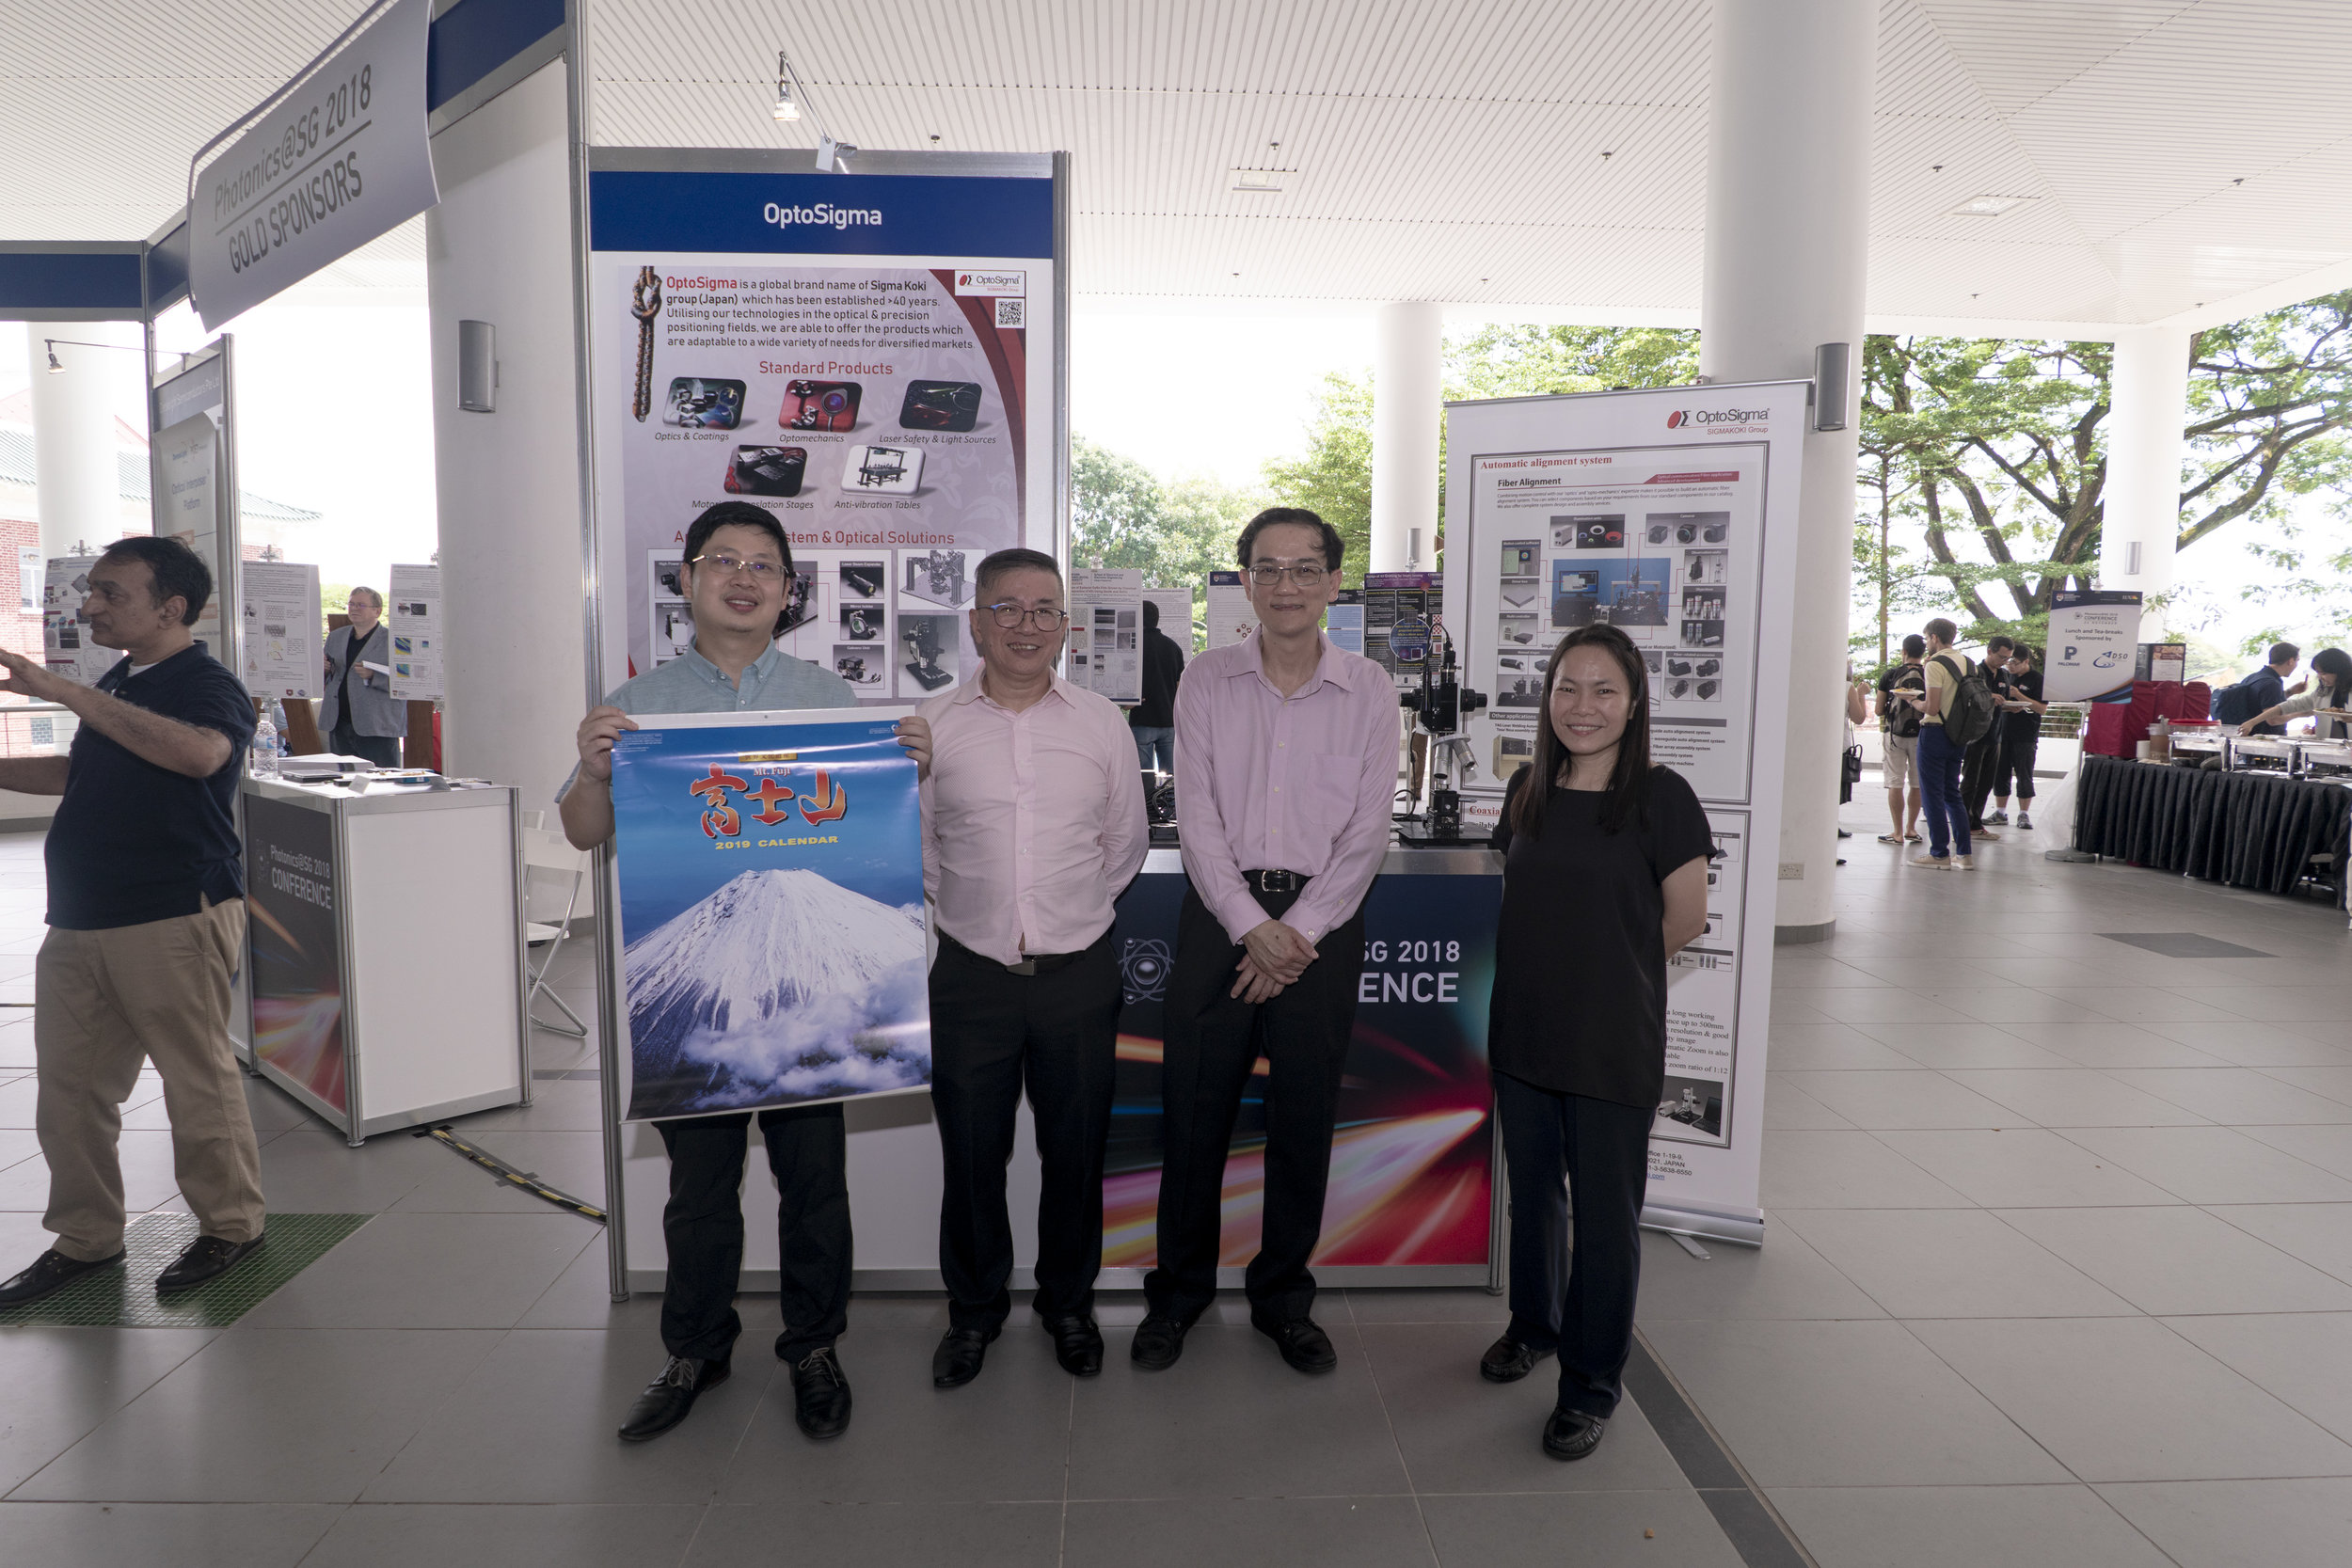 TPI Photonics SG 2018 Conference n Exhibition 0321rc.jpg